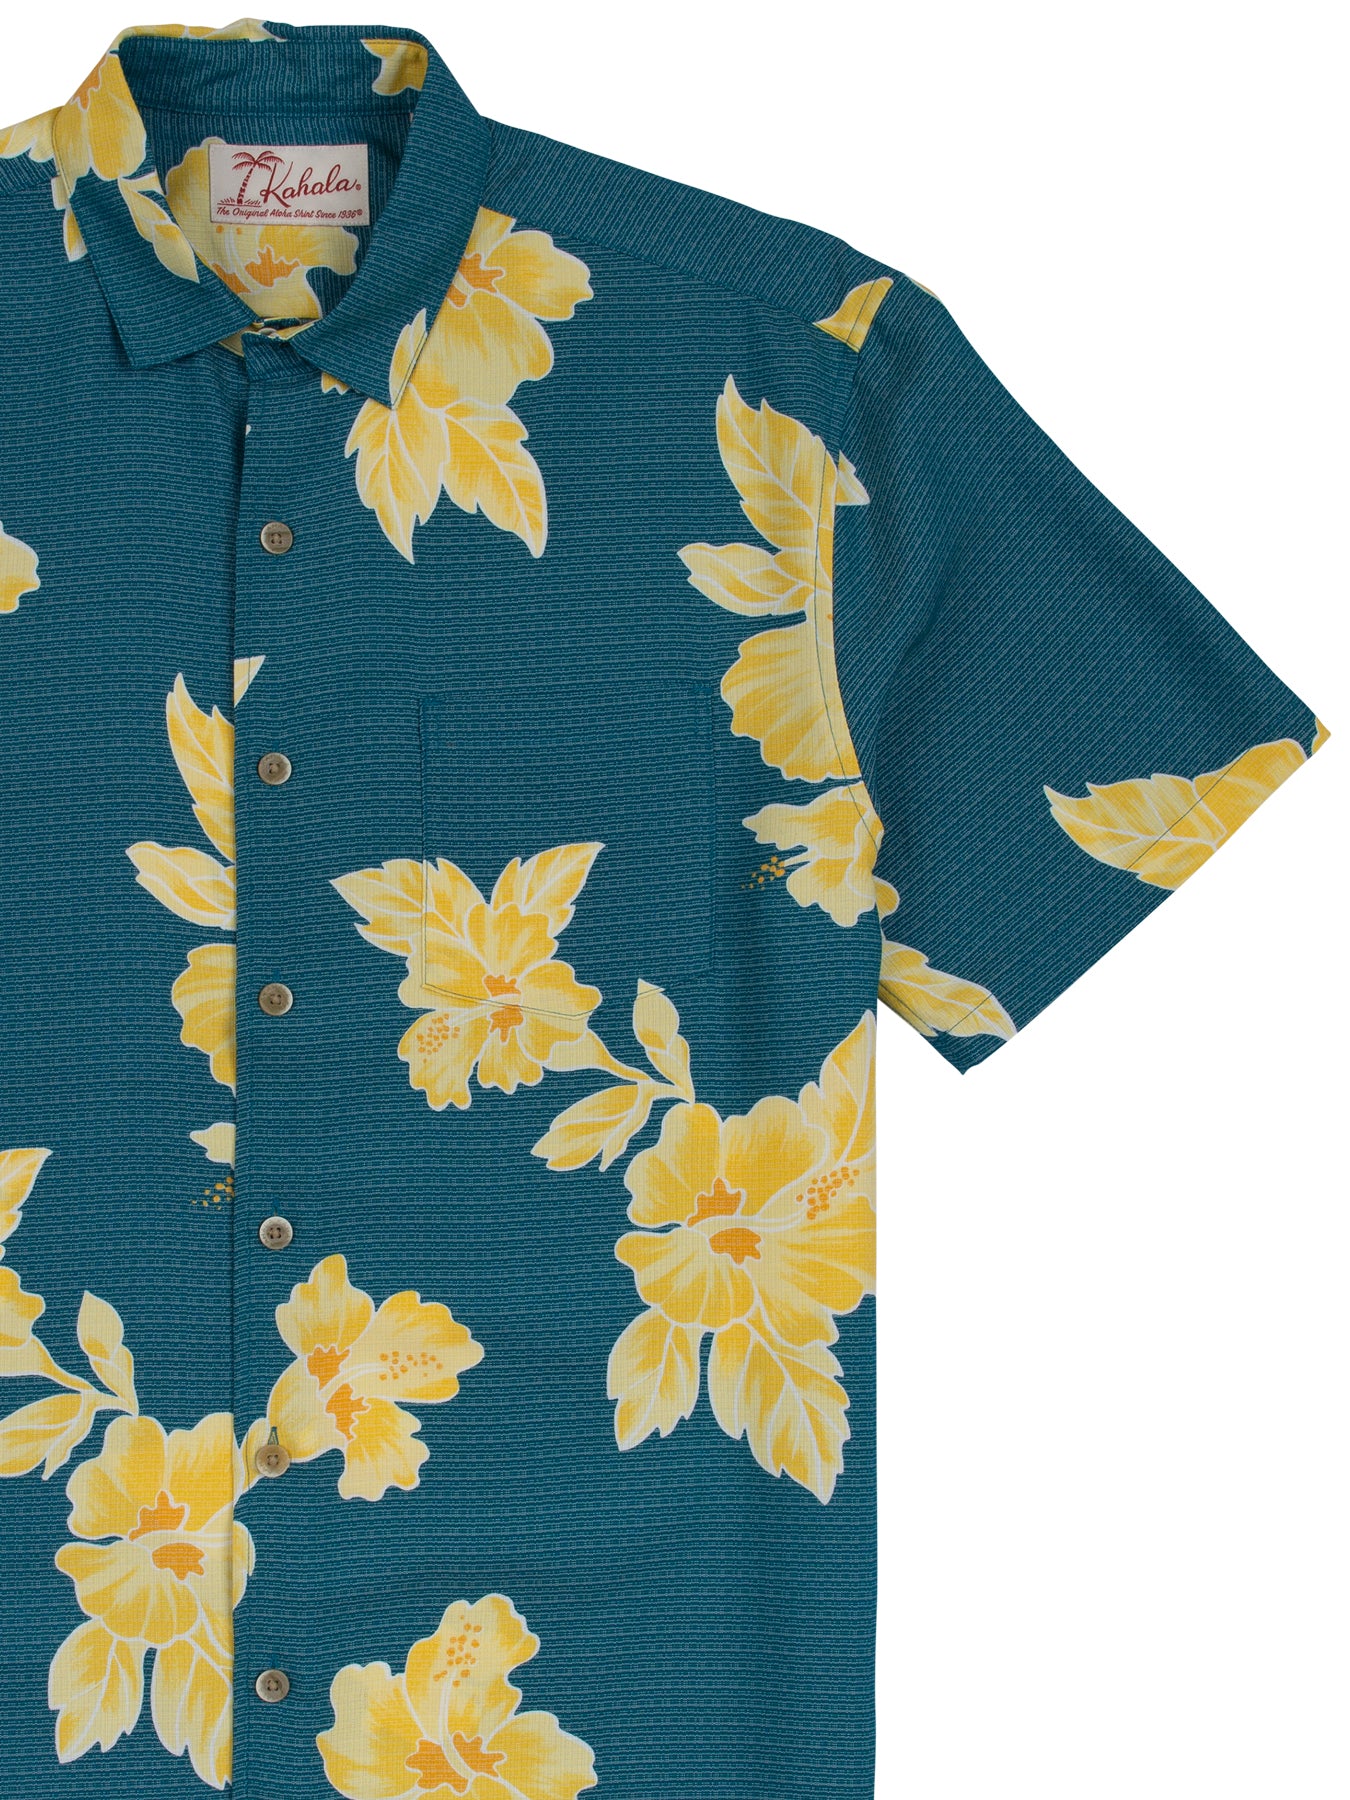 Todd Snyder x Kahala Aloha Shirt in Blue Floral